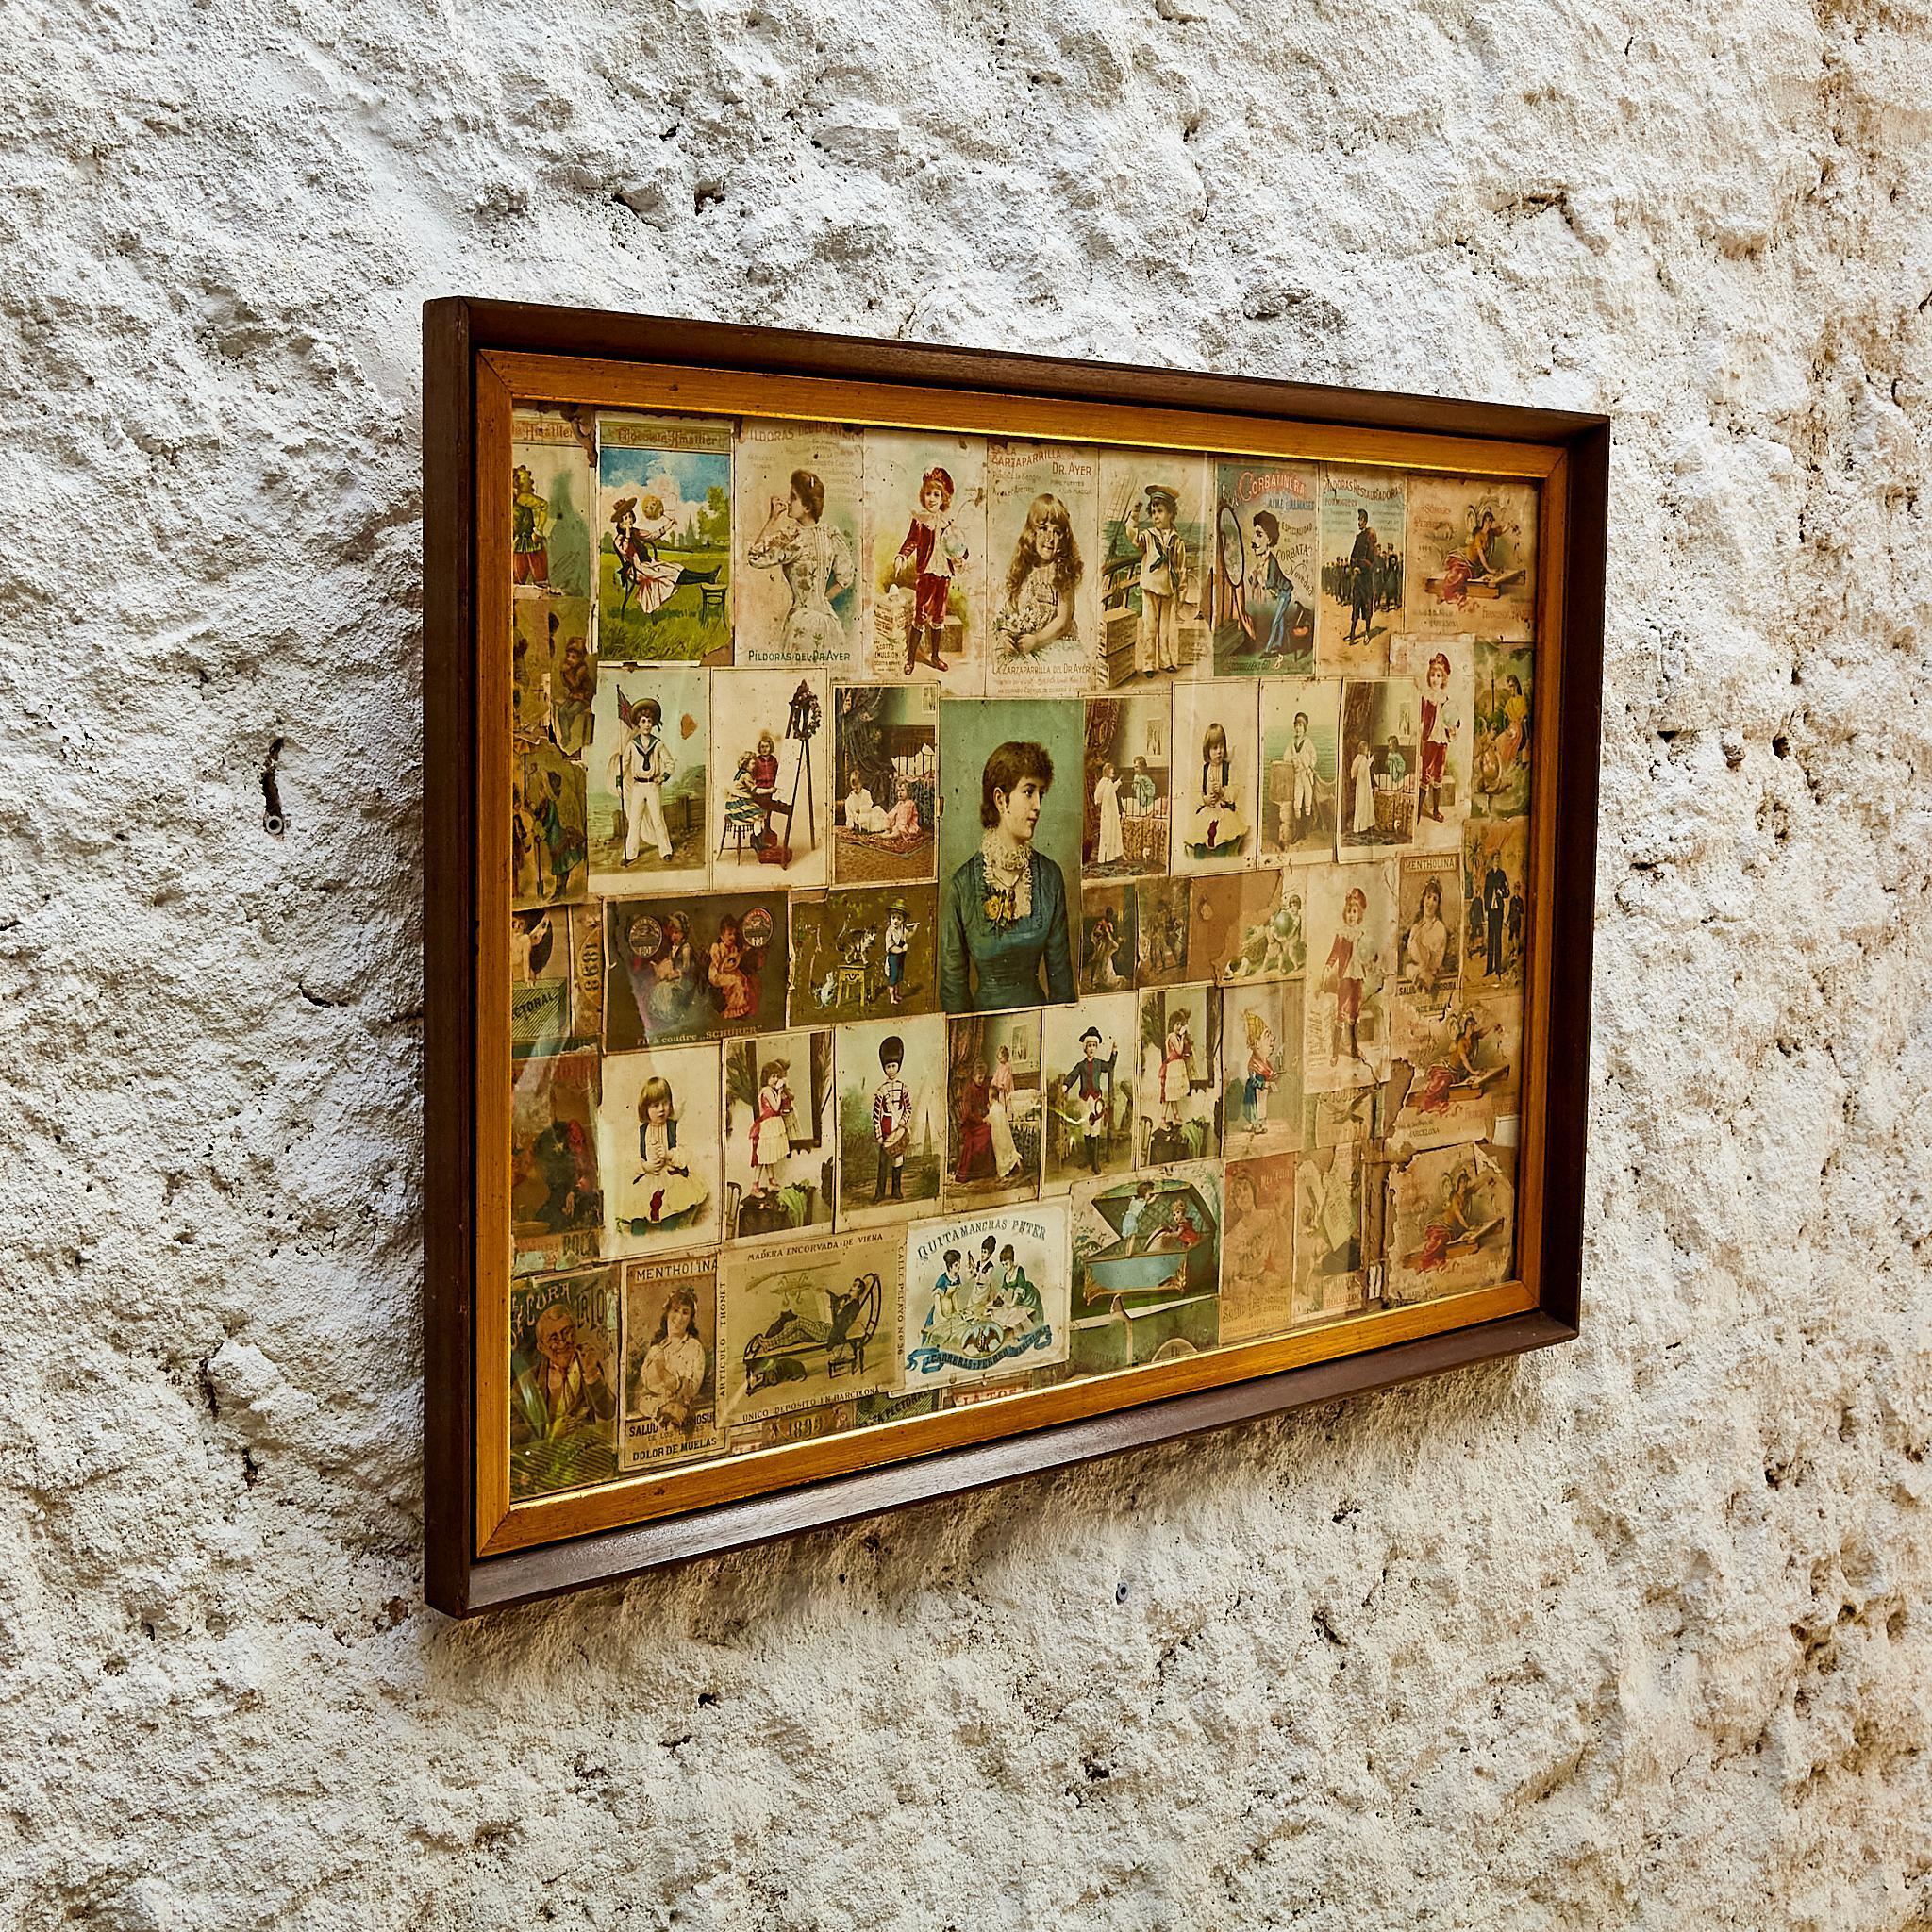 Framed Original Collage Postcard Publicity.

Manufactured Spain, circa 1930

Dimensions: 
D 3 x W 84 H 58 cm

In original condition, with minor wear consistent with age and use, preserving a beautiful patina.

Important information regarding